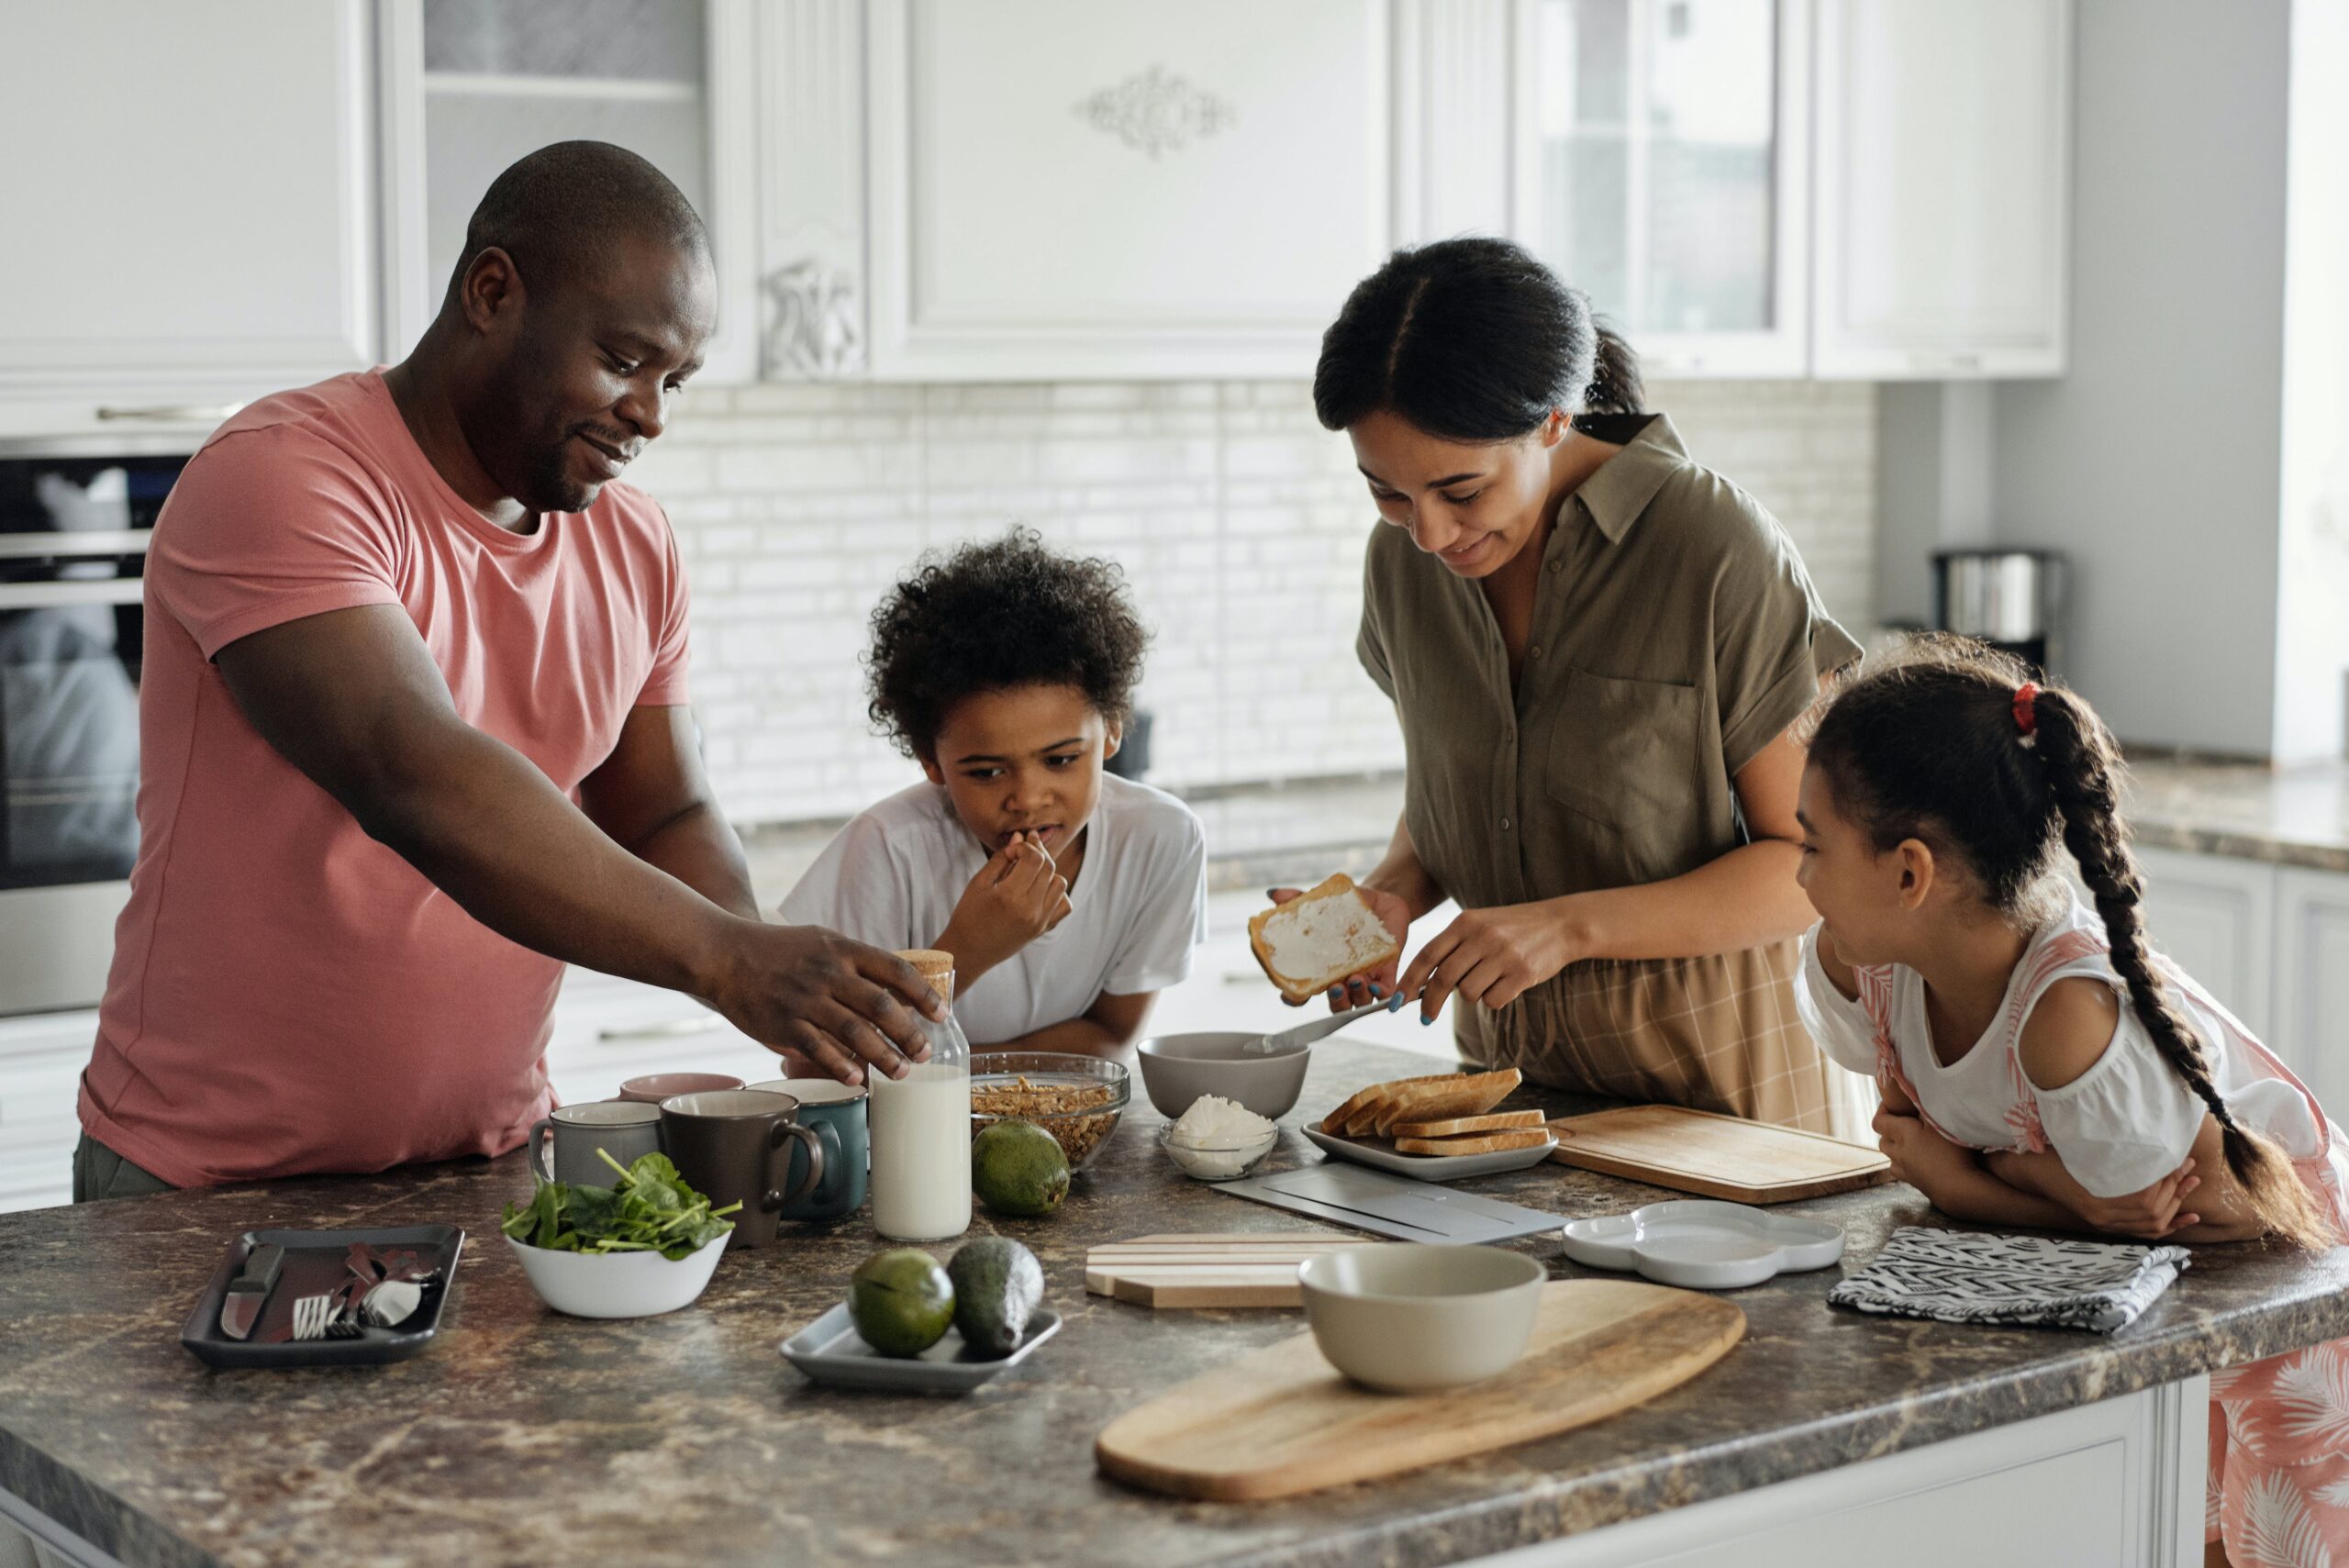 A family of four gather around their kitchen table passing food to each other. The father reaches for a bottle of milk, the mother spreads butter on her toast, and their two children are beside them smiling.